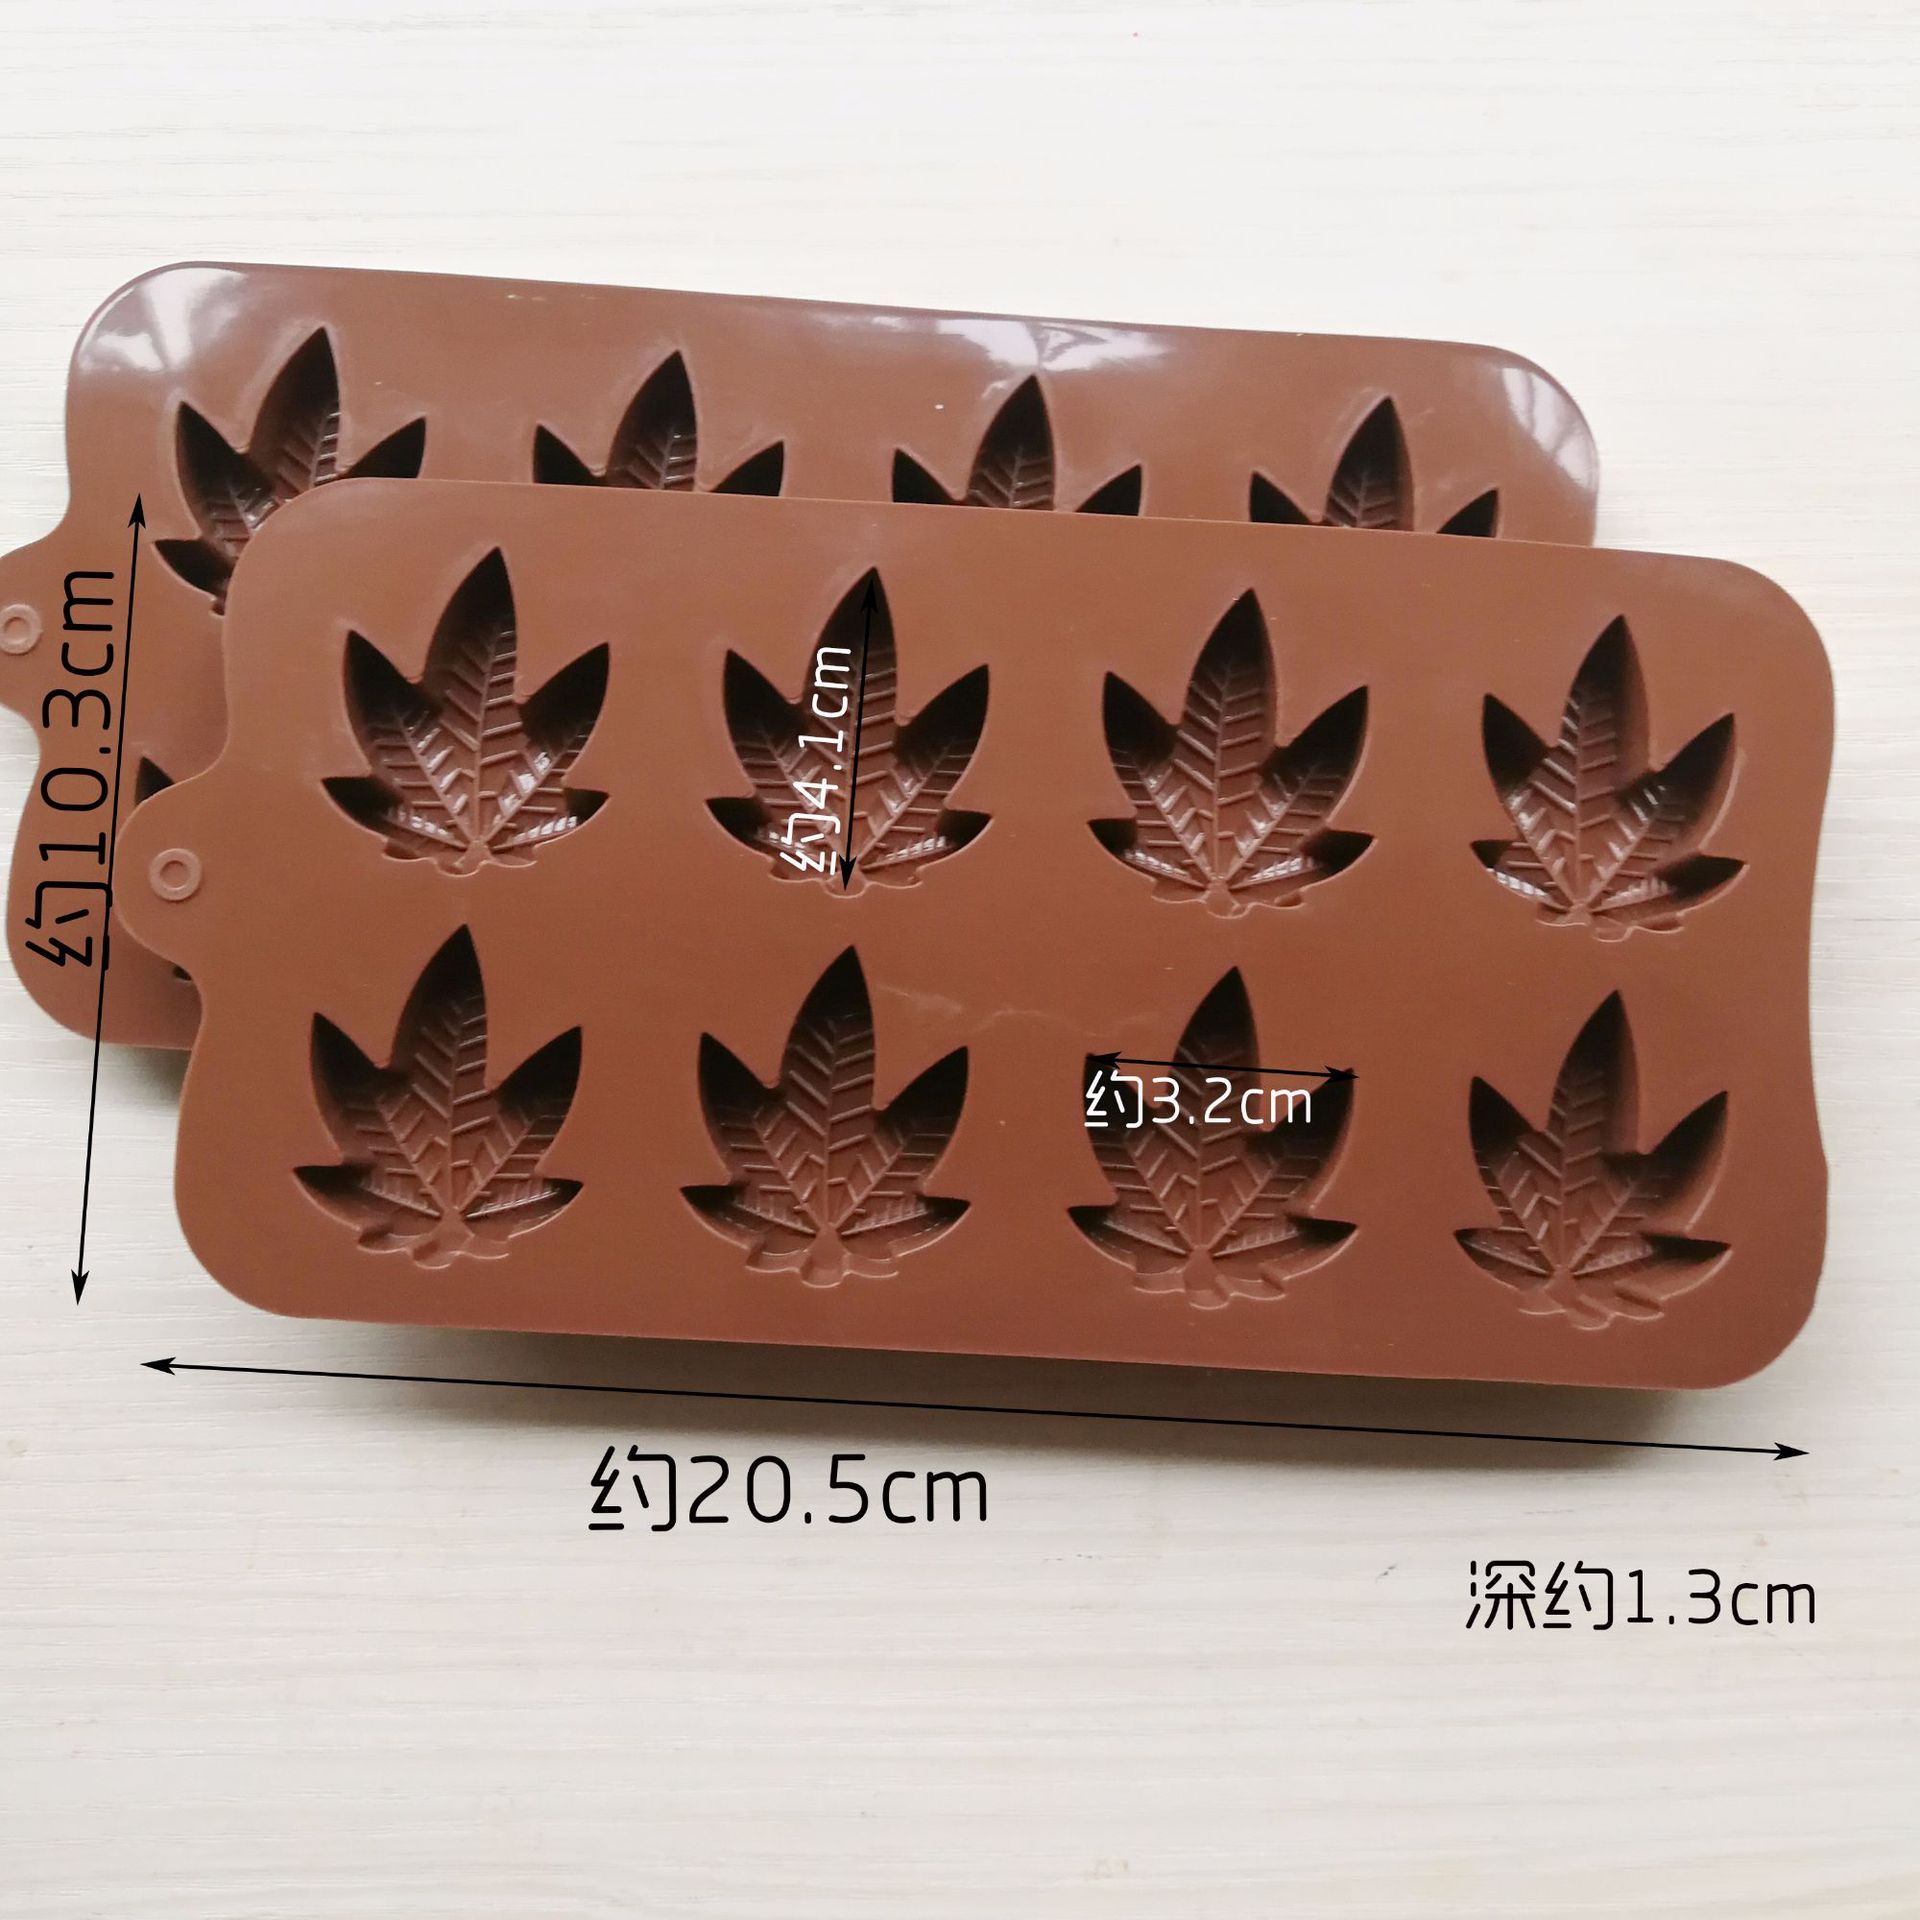 New DIY Bakeware & Tools Baking Pastry Mould Coconut Leaf Design Silicone Chocolate Mold Birthday Cake Cupcake Cheesecake k980